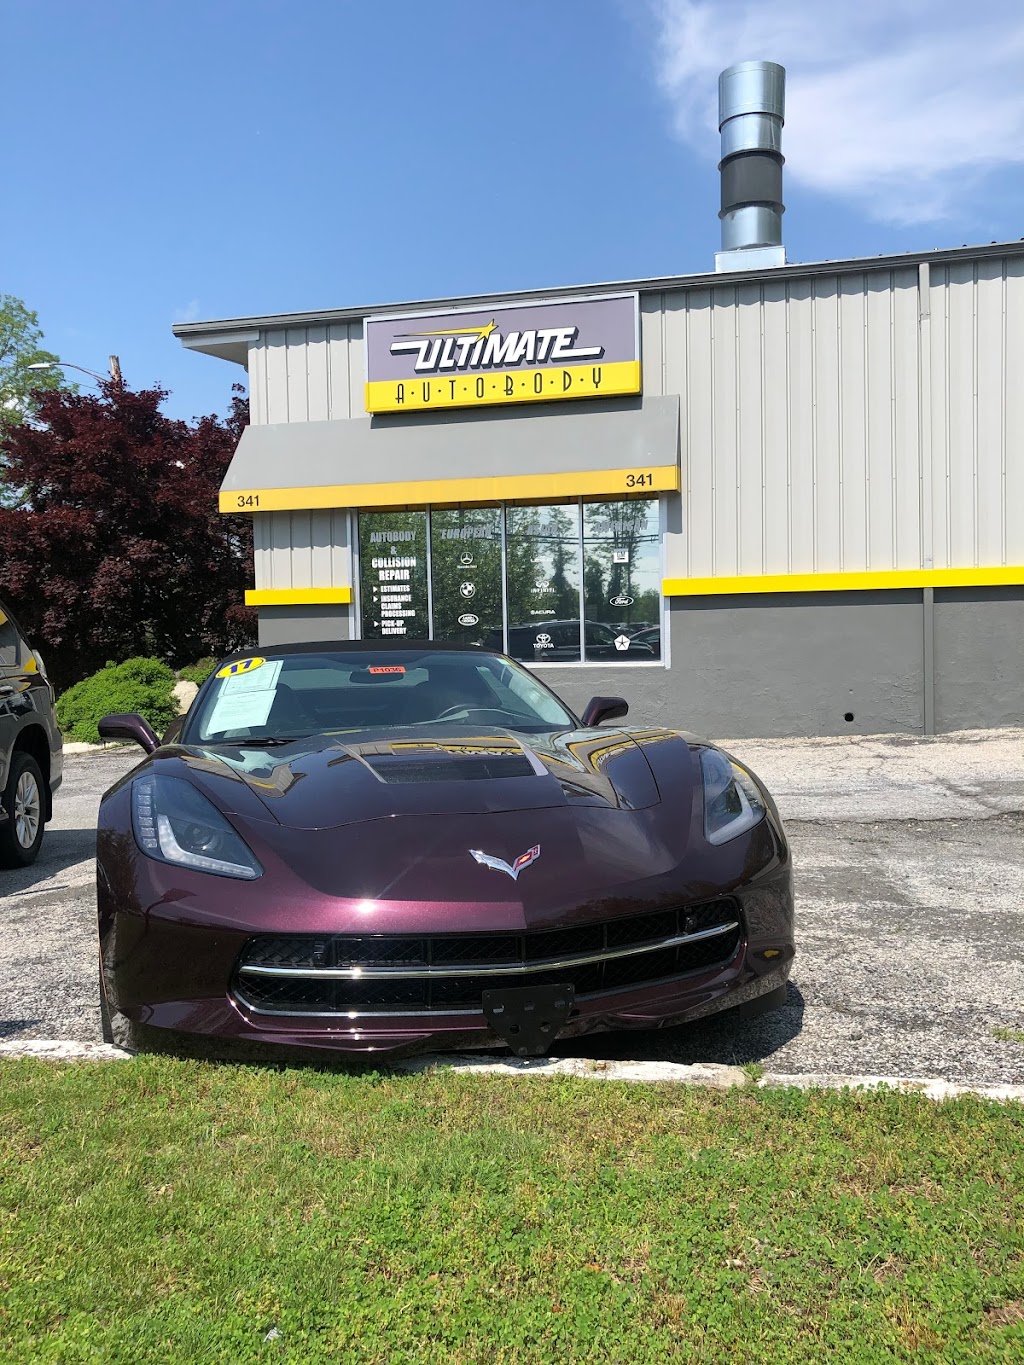 Ultimate Auto Body | 341 Adams St, Bedford Hills, NY 10507 | Phone: (914) 242-4600